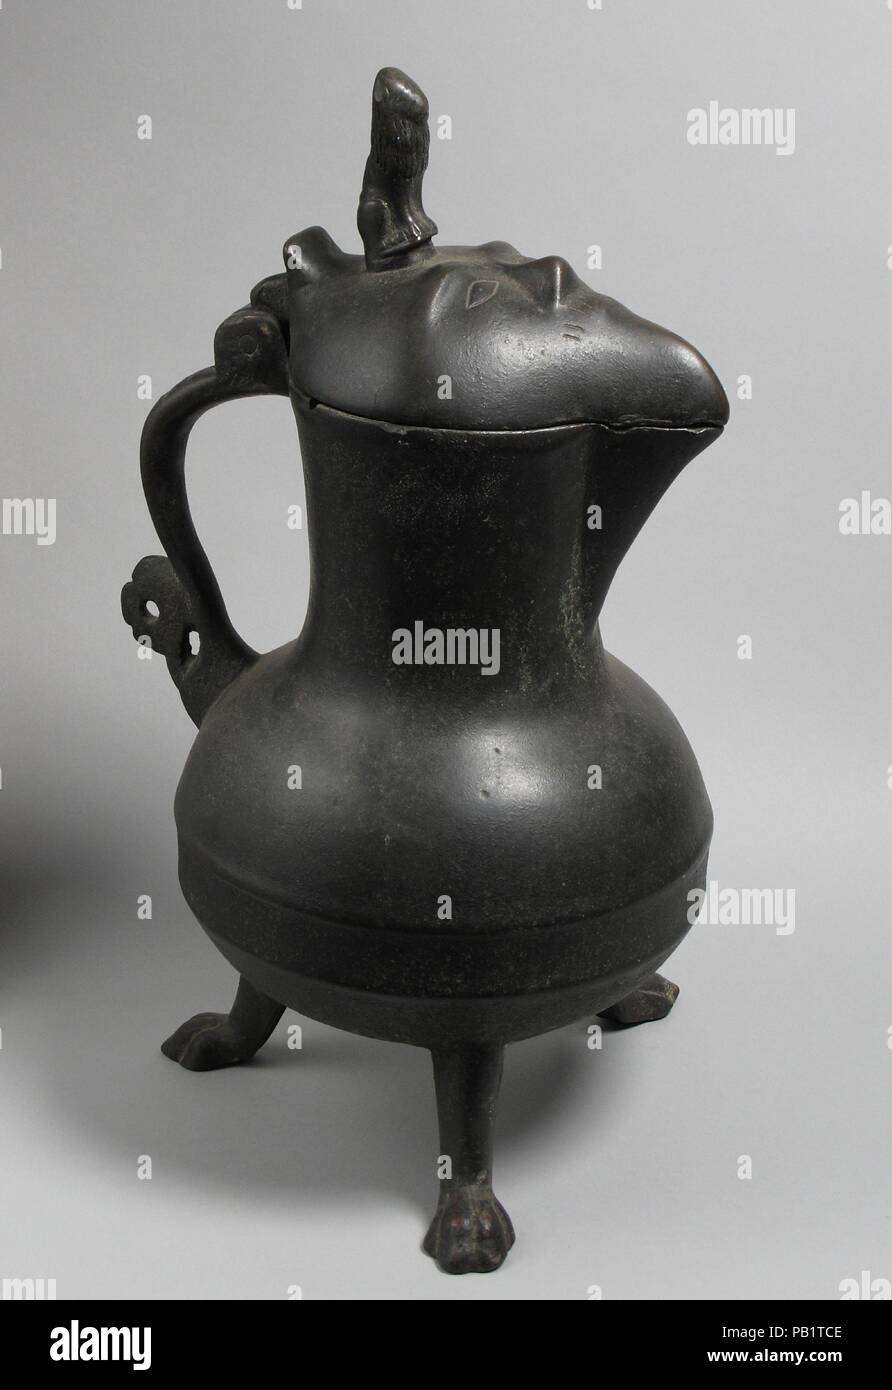 https://c8.alamy.com/comp/PB1TCE/covered-jug-culture-german-or-south-netherlandish-dimensions-overall-17-18-in-435-cm-date-late-14th-century-museum-metropolitan-museum-of-art-new-york-usa-PB1TCE.jpg